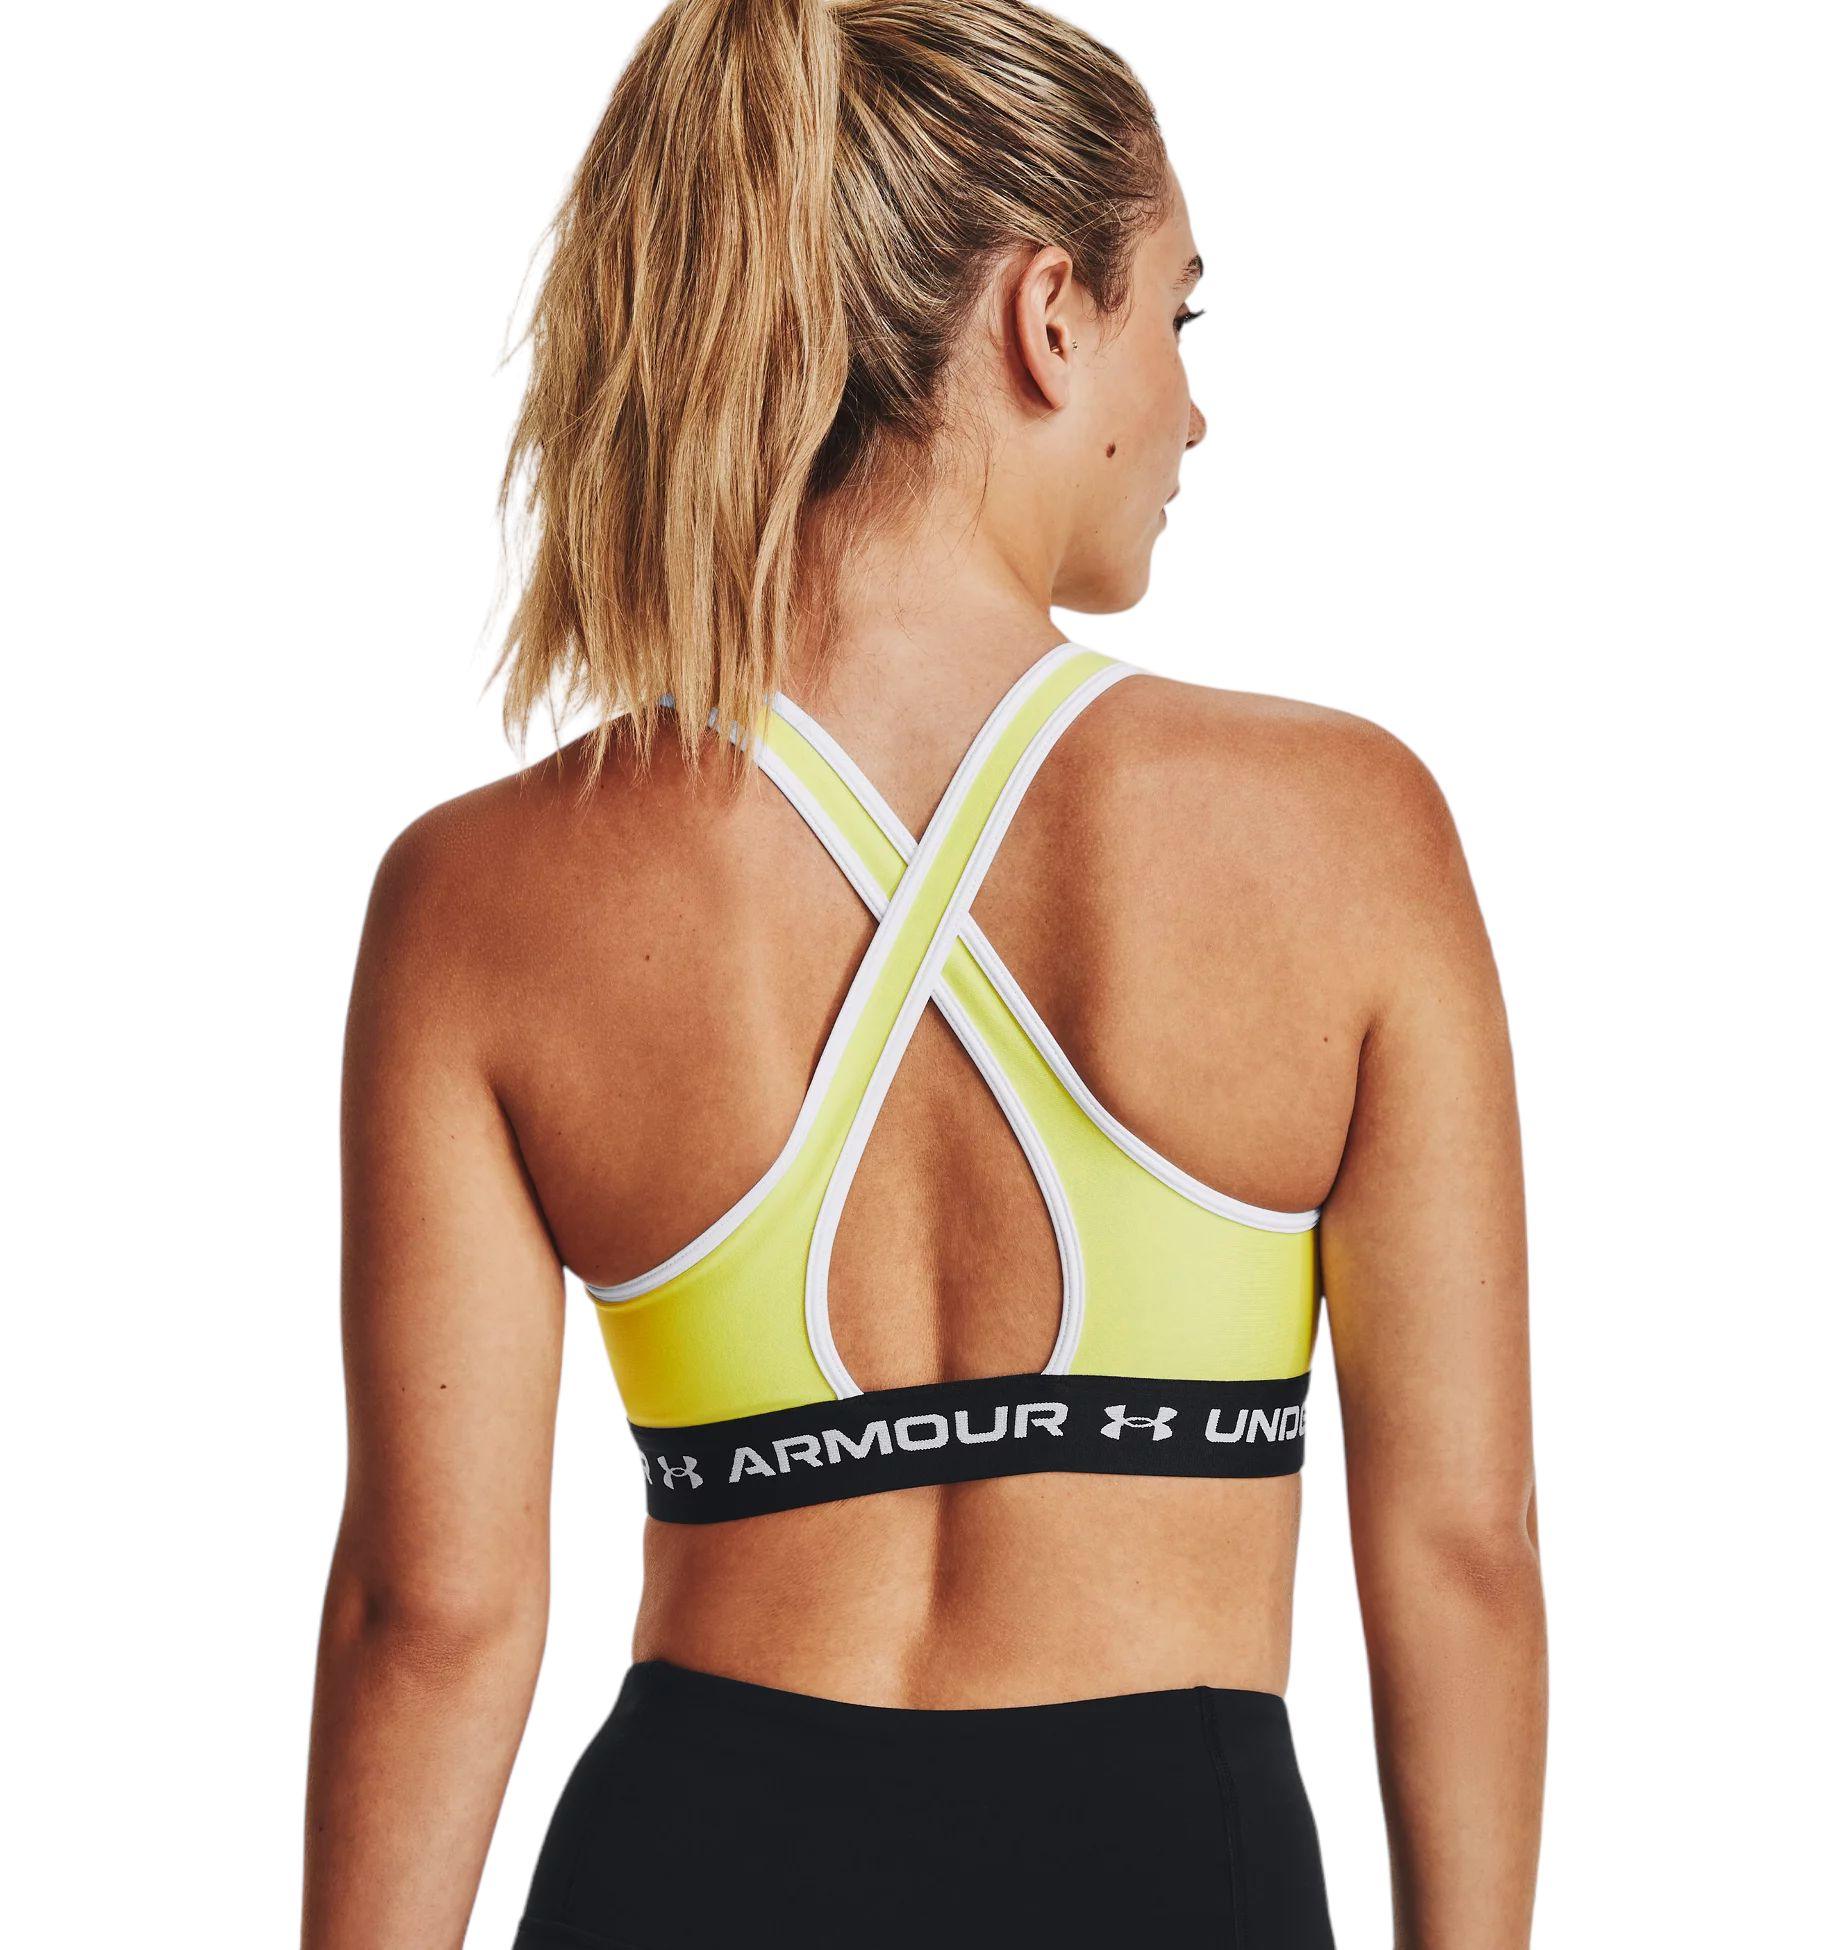 Under Armour | Top Mid Crossback Sports Bra Donna Lime Yellow/White - Fabbrica Ski Sises